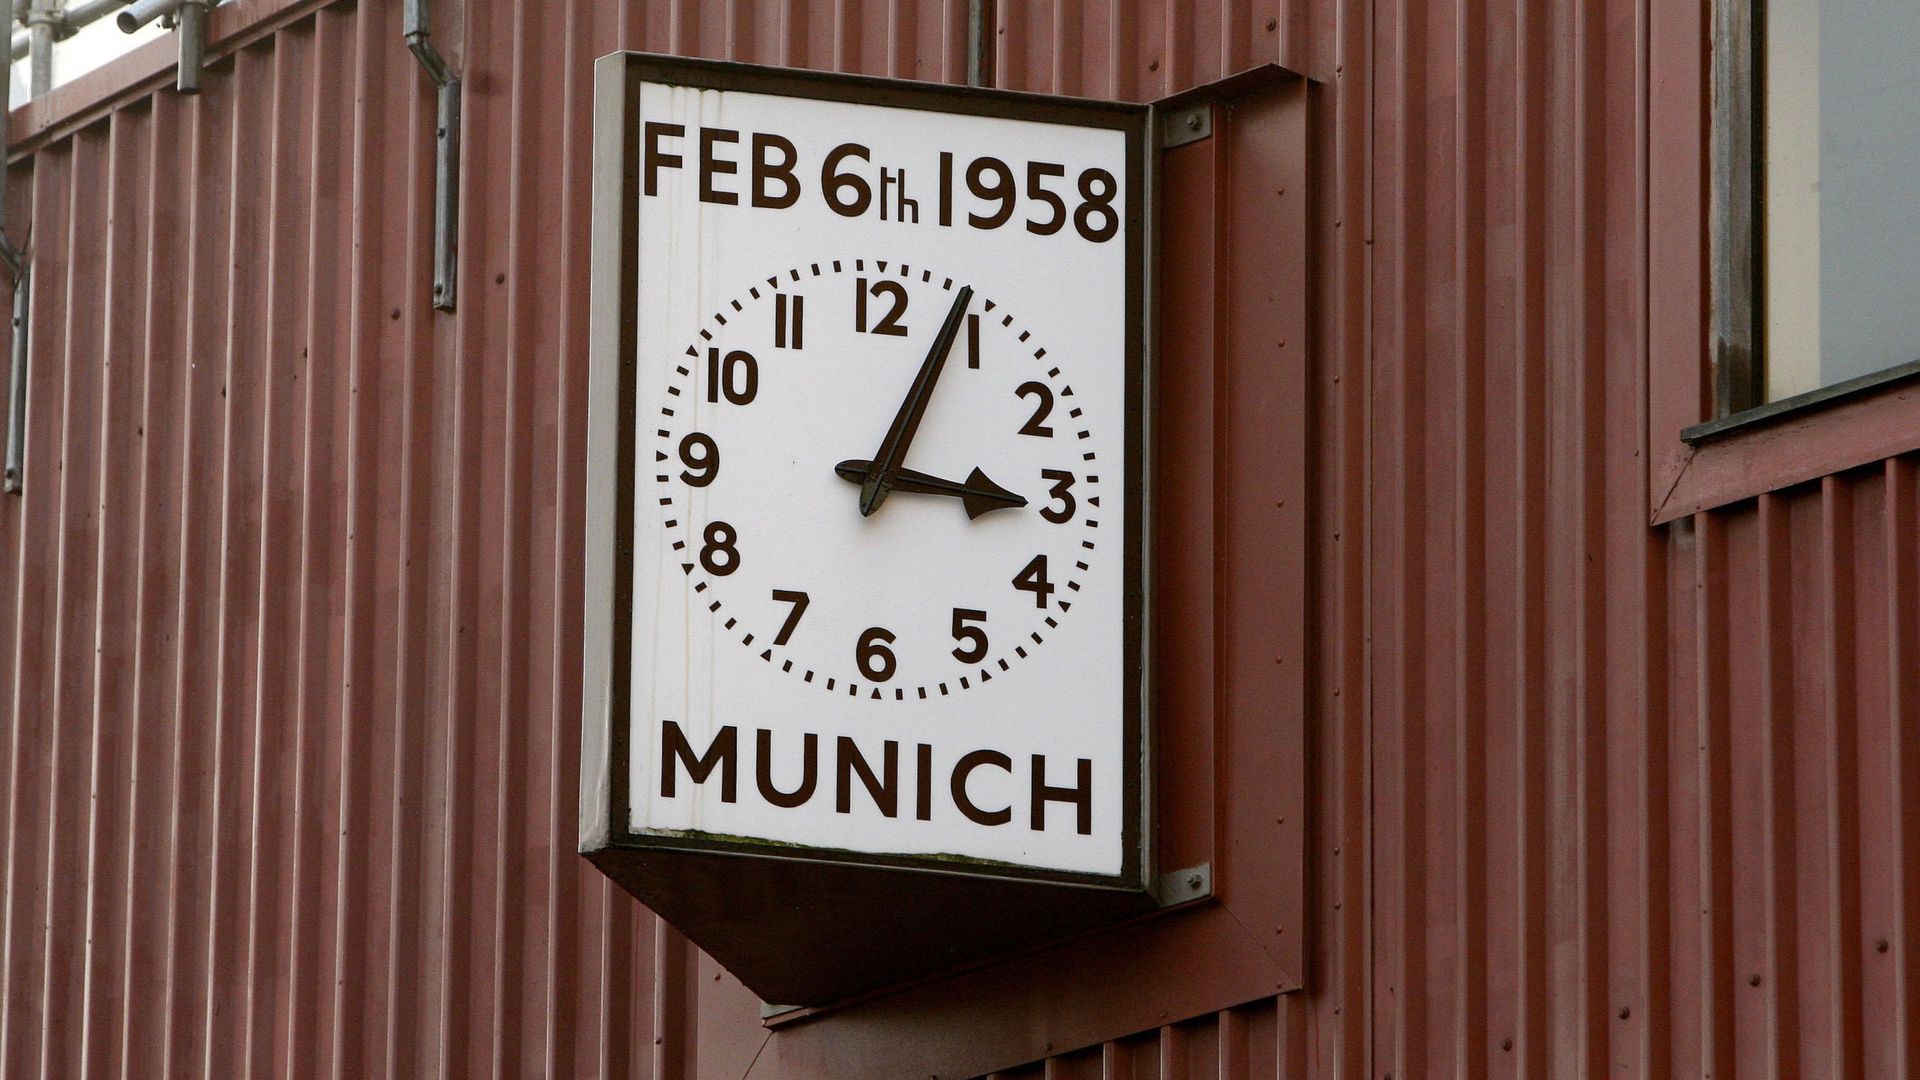 Football fan given banning order after mocking Munich air disaster